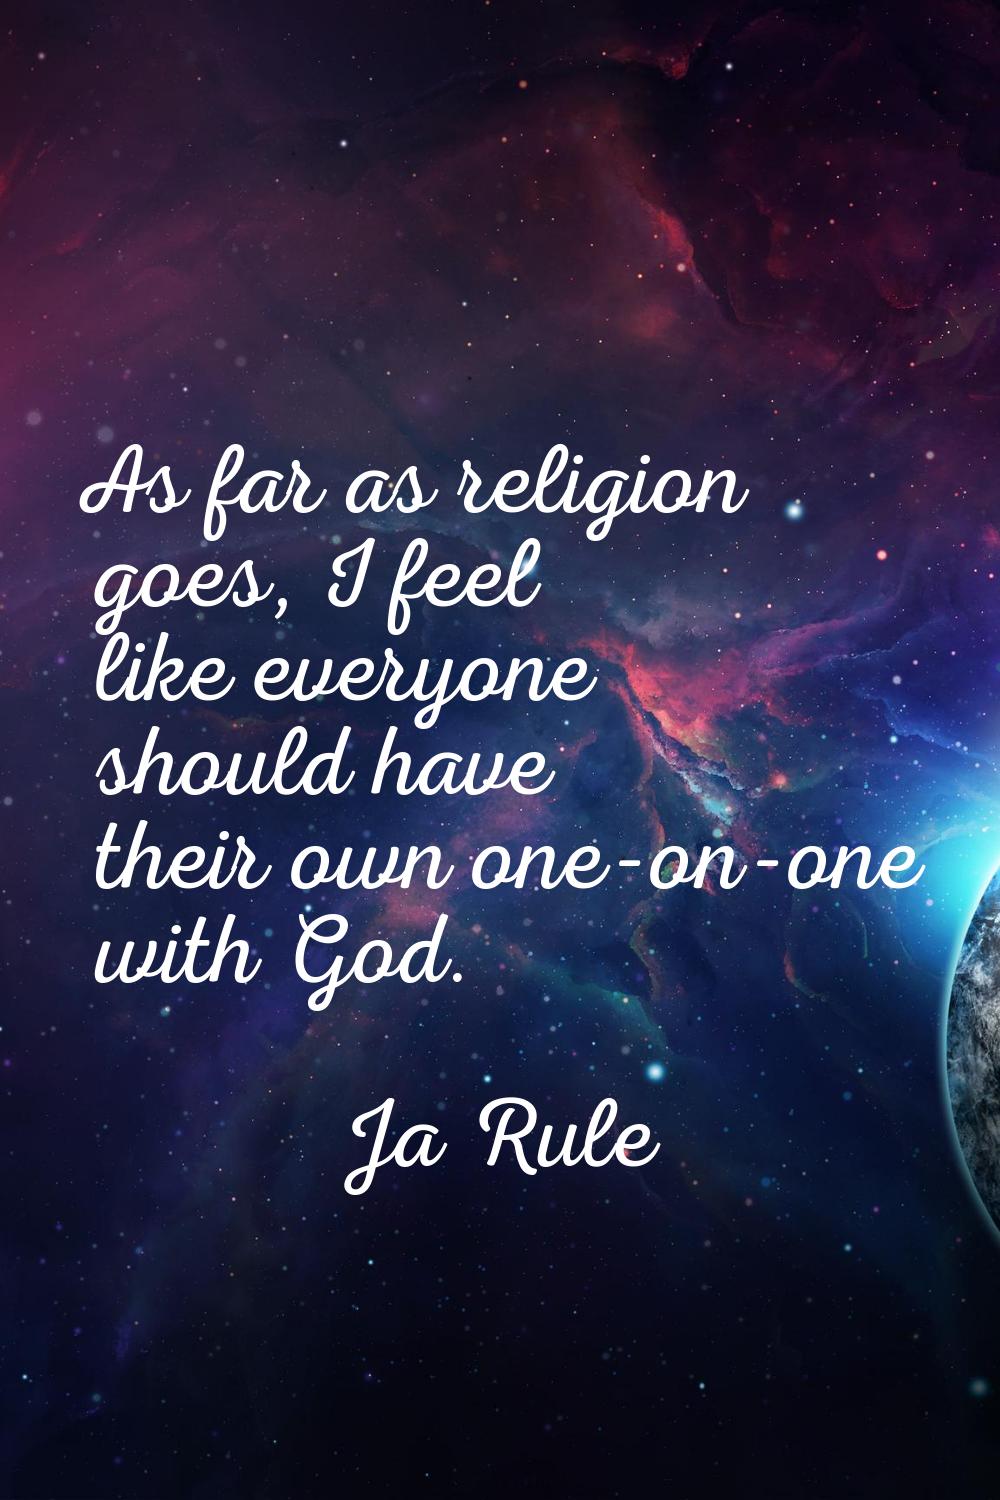 As far as religion goes, I feel like everyone should have their own one-on-one with God.